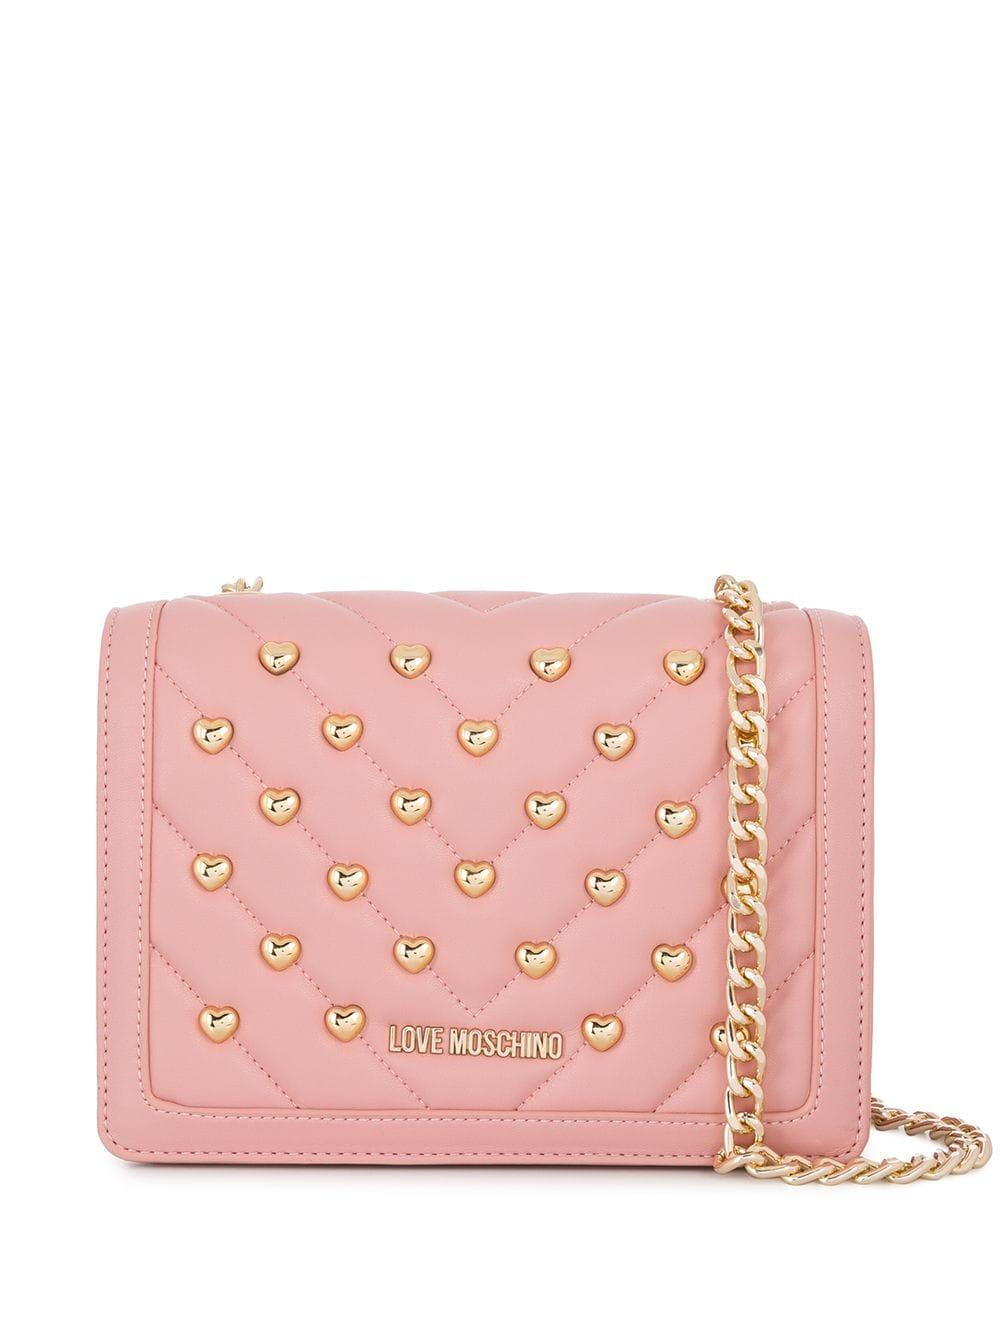 Love Moschino Quilted Crossbody Bag in Pink - Lyst